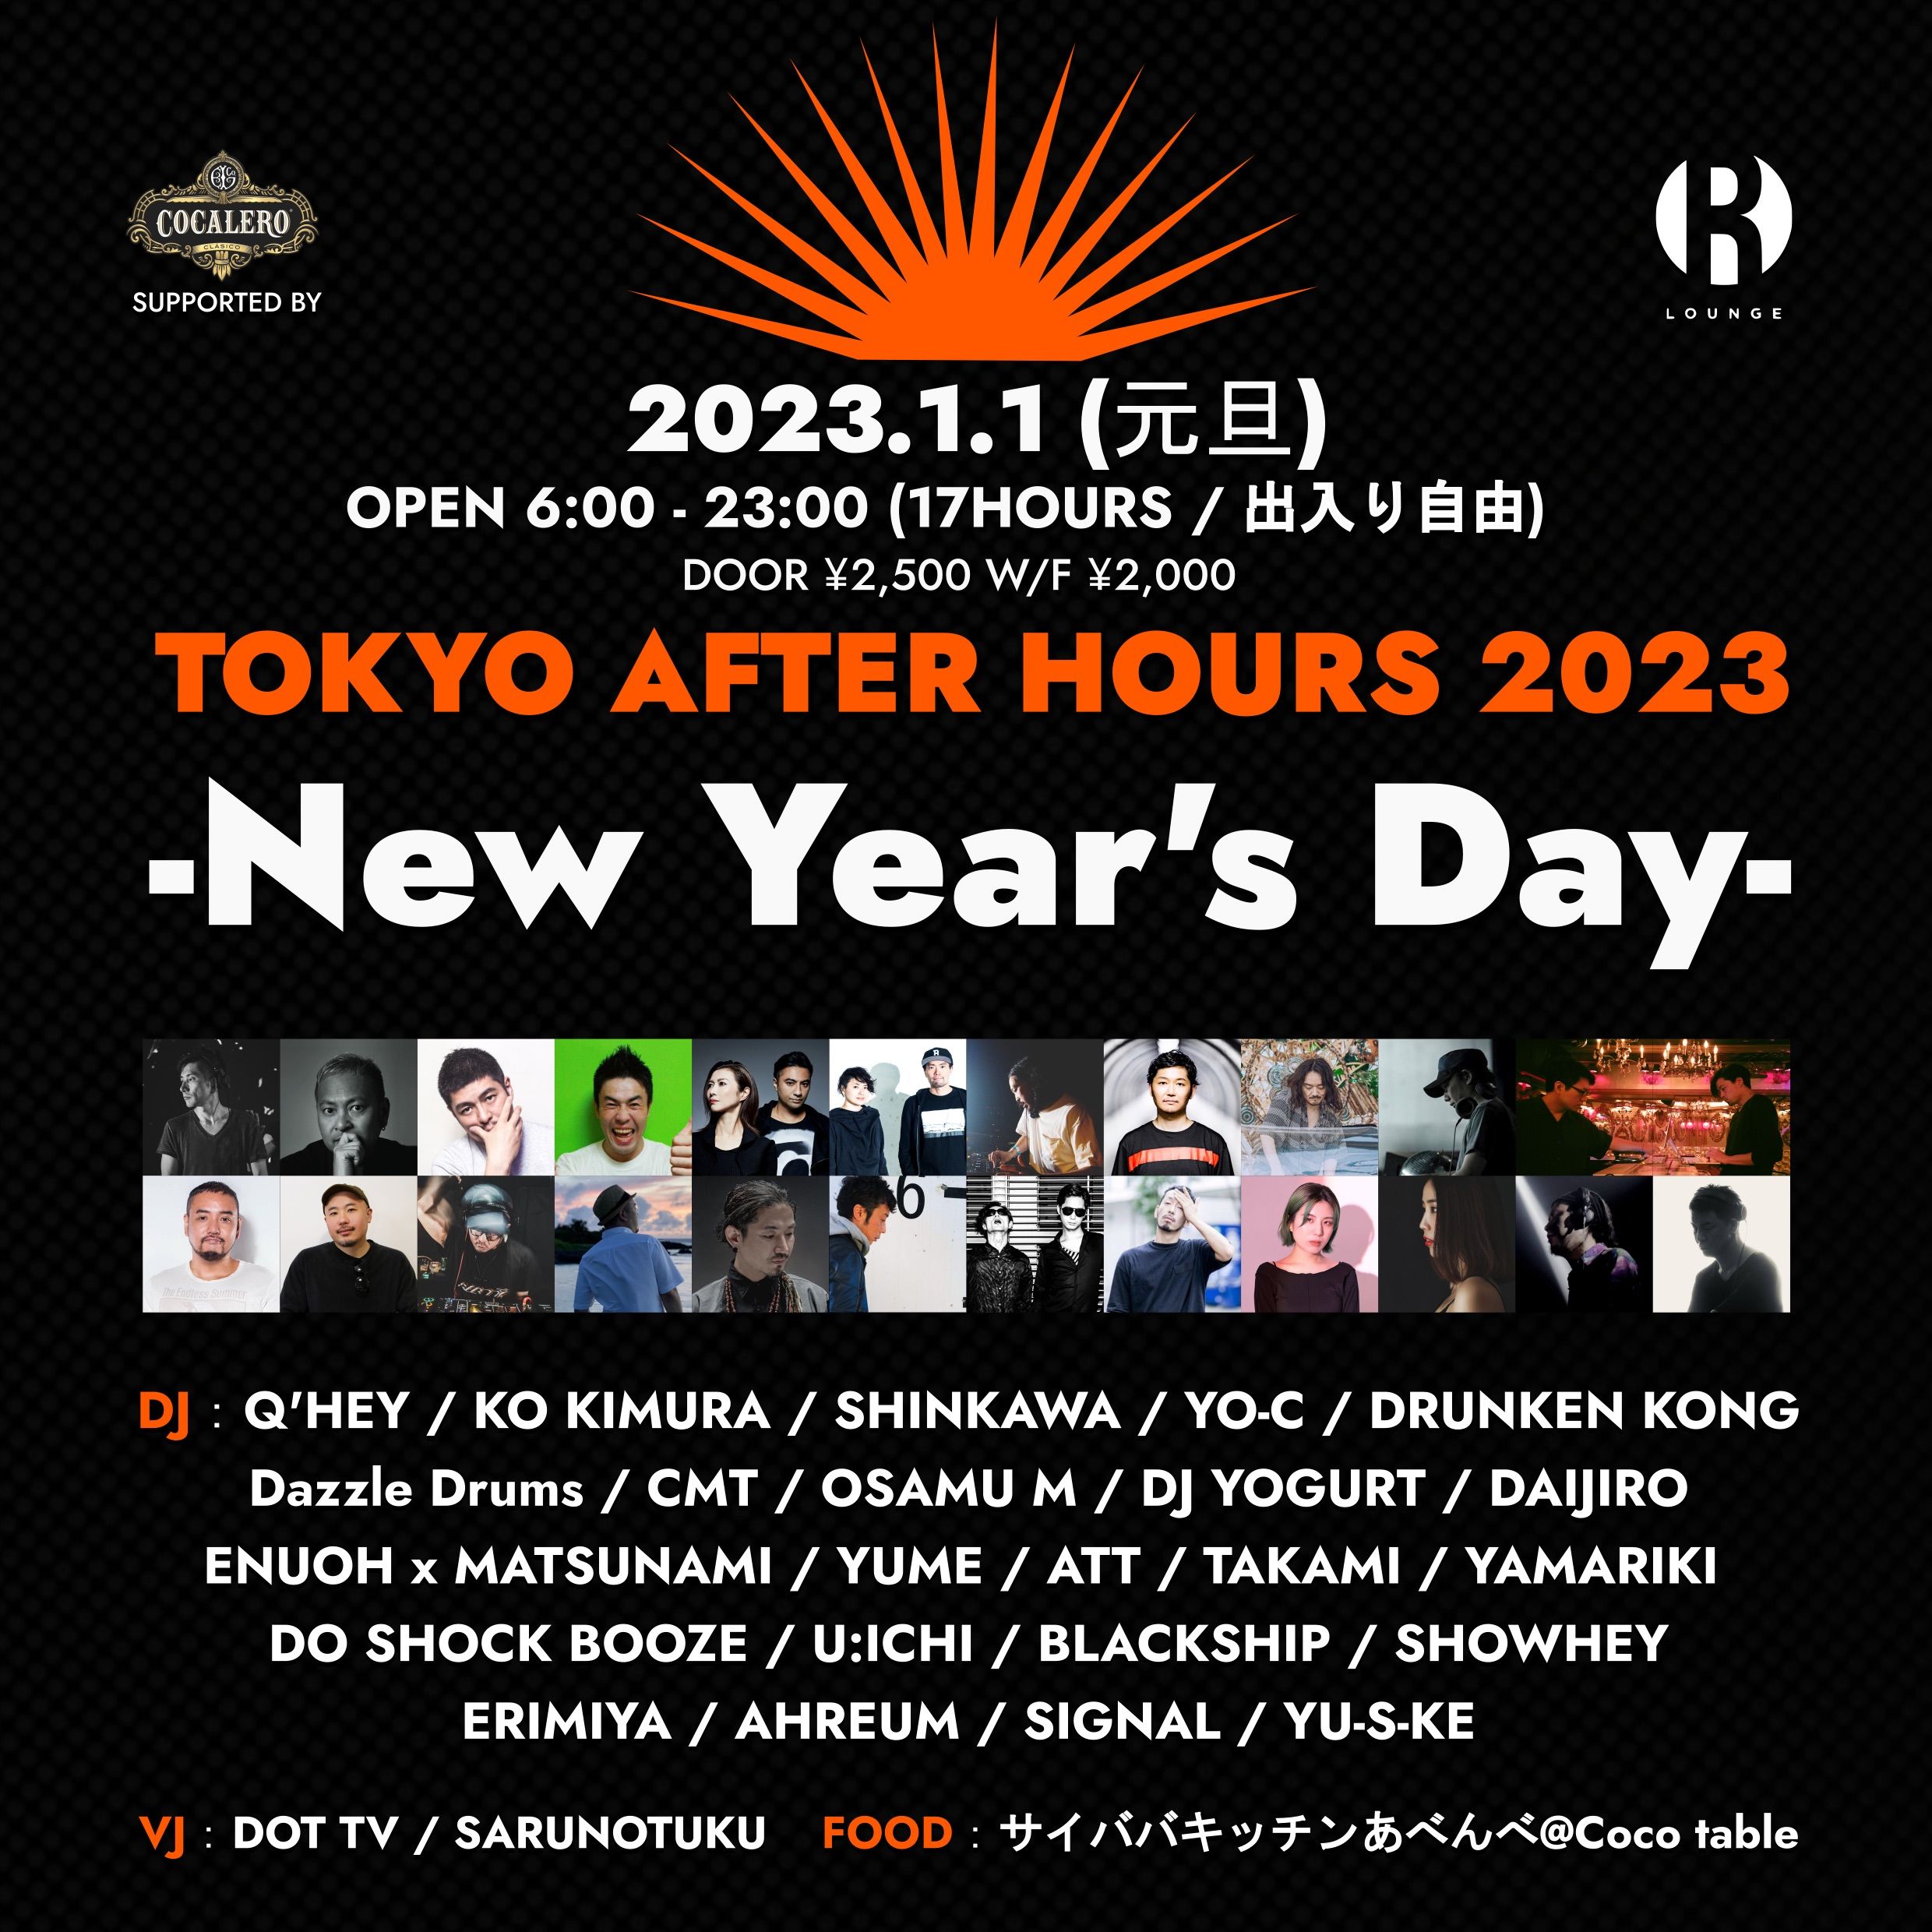 TOKYO AFTER HOURS 2023 -New Year's Day-